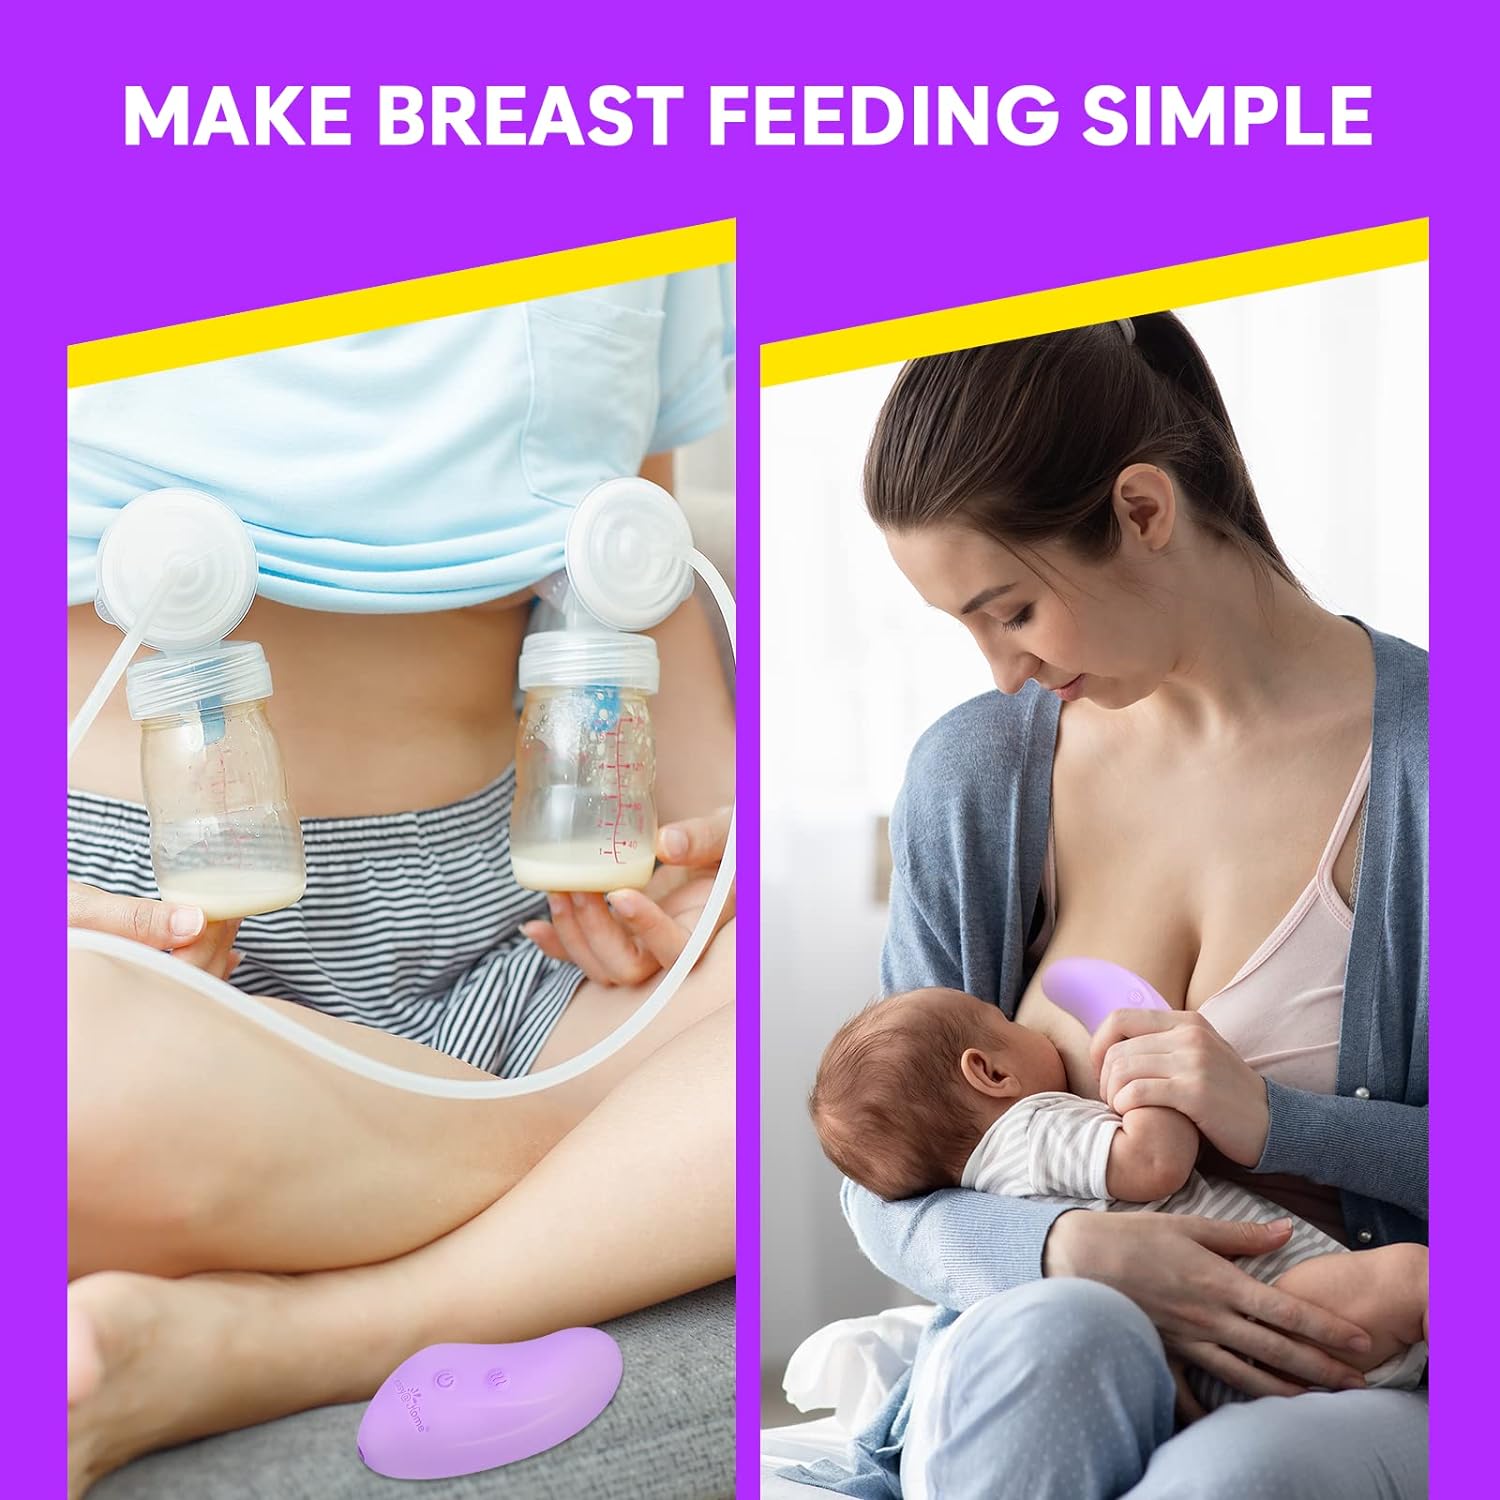 Easy@Home Lactation Massager for Breastfeeding: 2-in-1 Nursing Baby Pump Mom Breast Support | Warming Sore Tenderness Relief Nipple Massage | Postpartum Essential | Improves Breastmilk Flow EHL038 : Baby